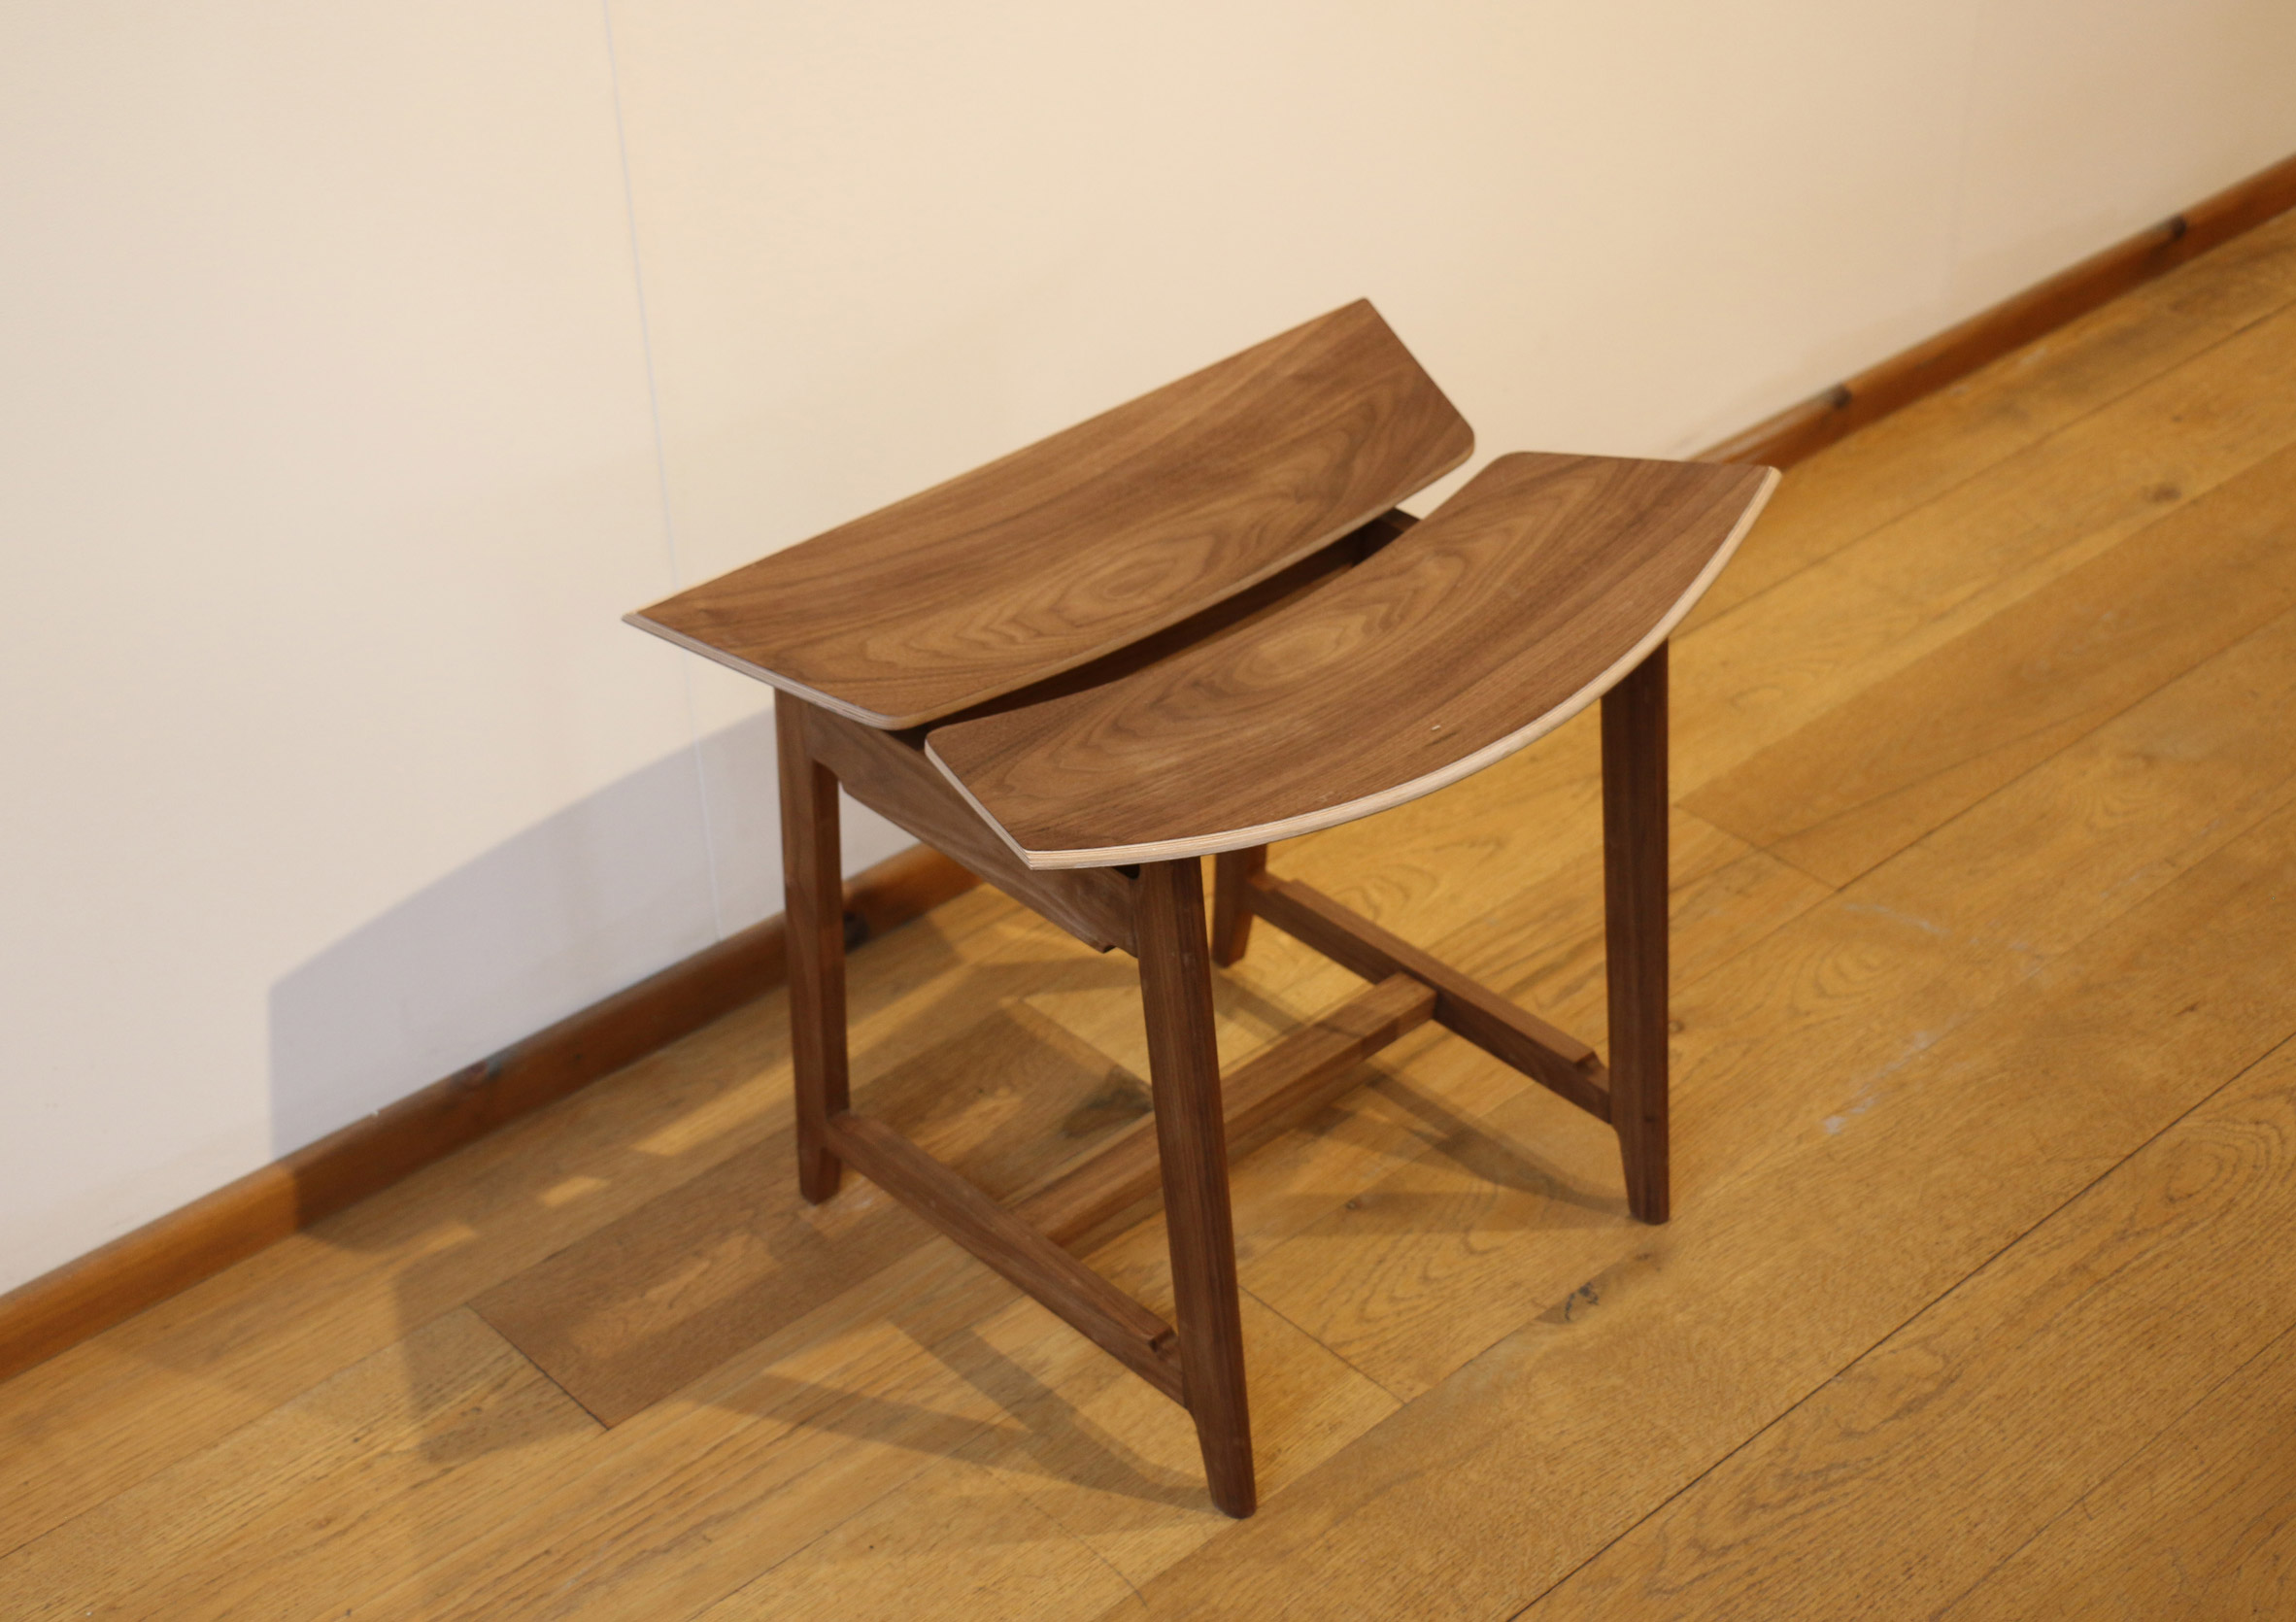 Photograph of a wooden stool